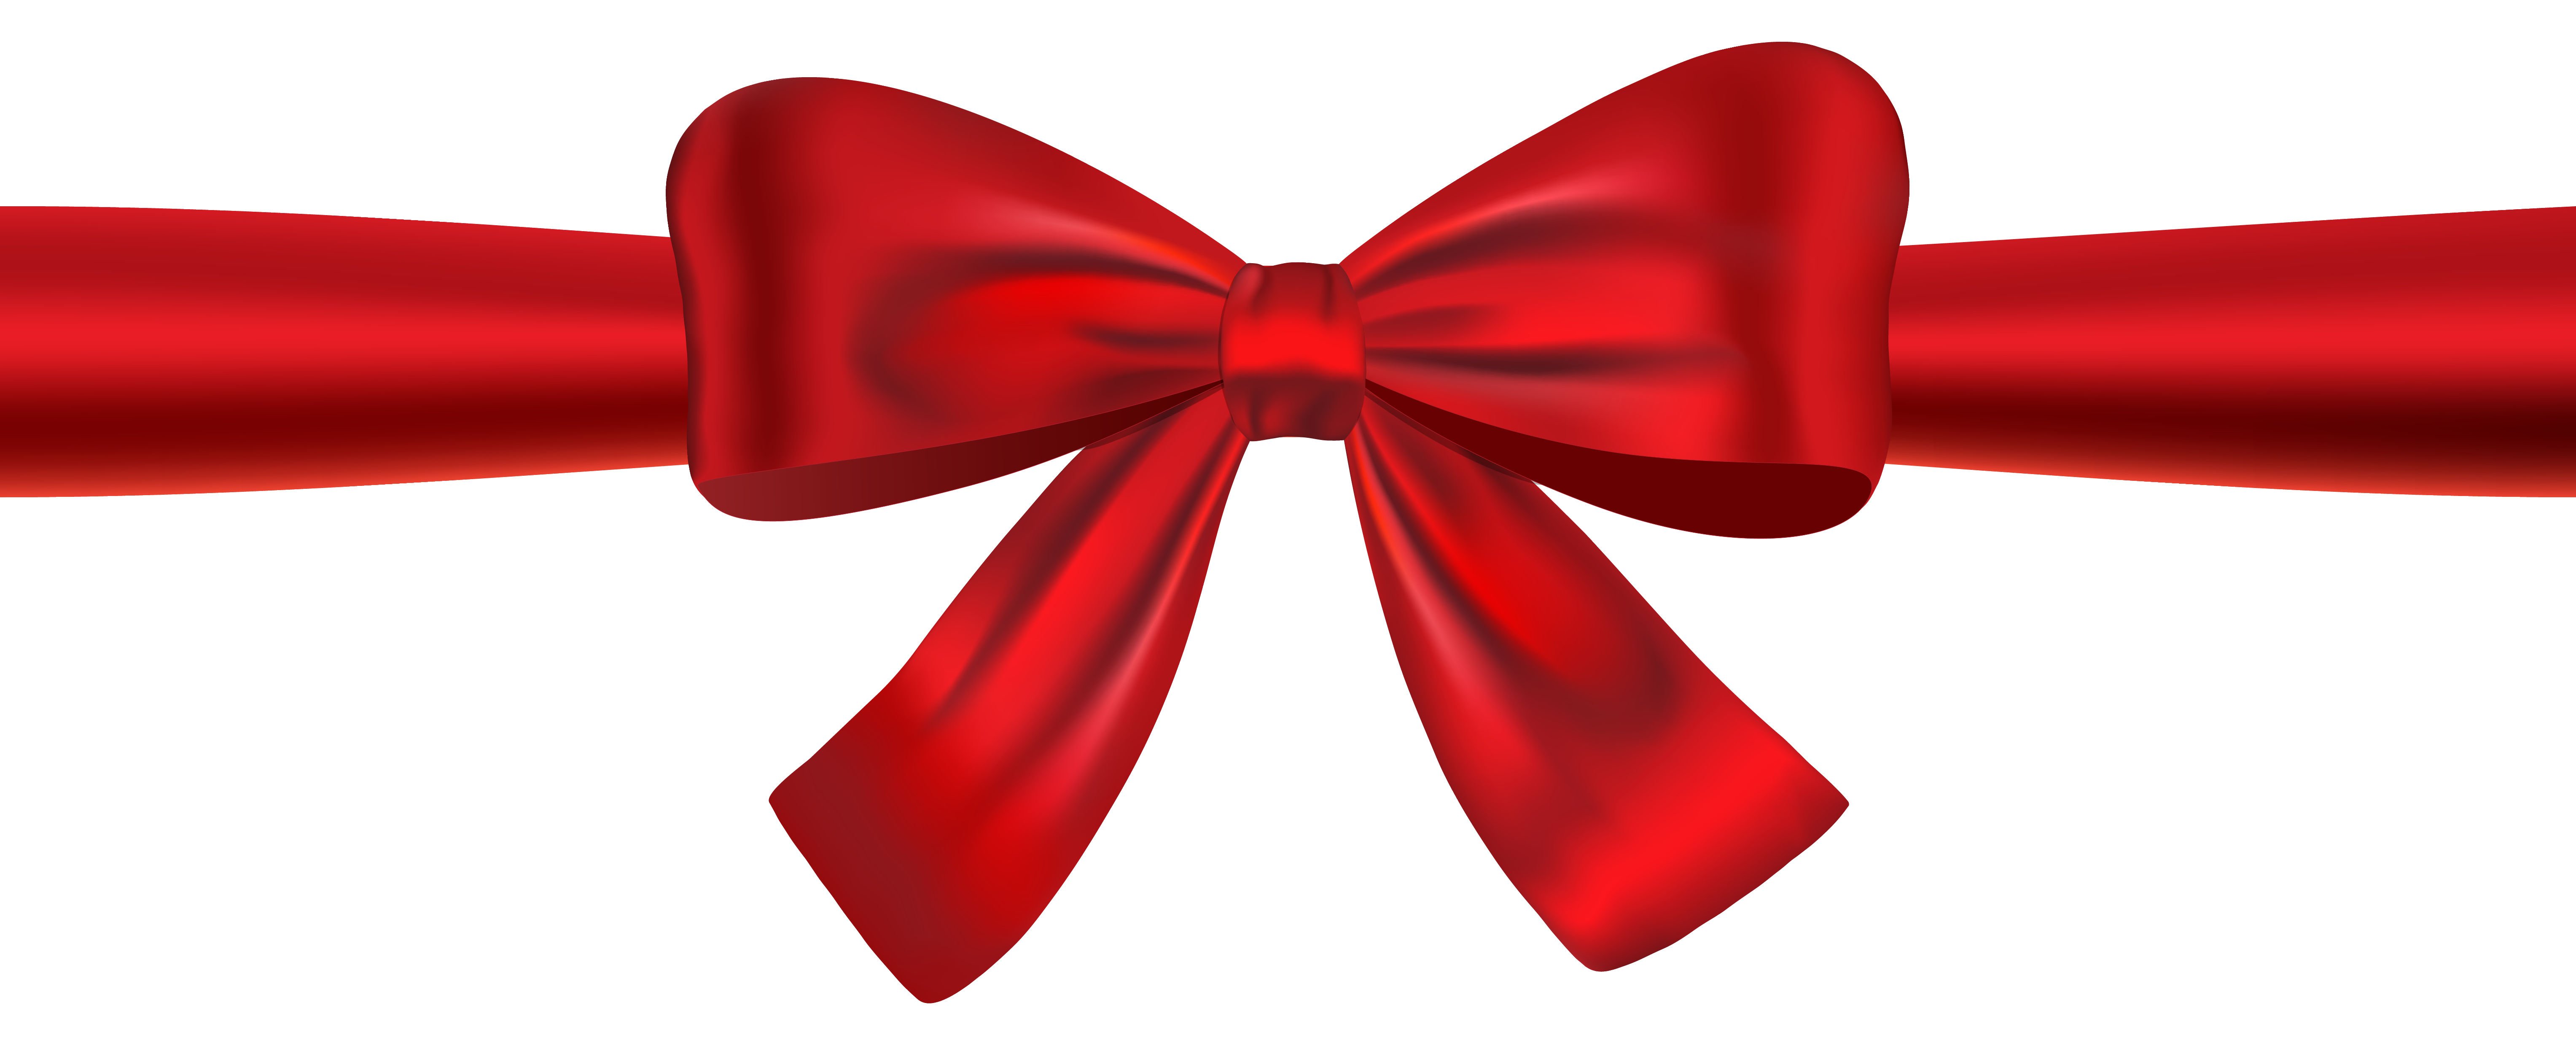 Cute and festive Transparent background red bow Images for your holiday ...